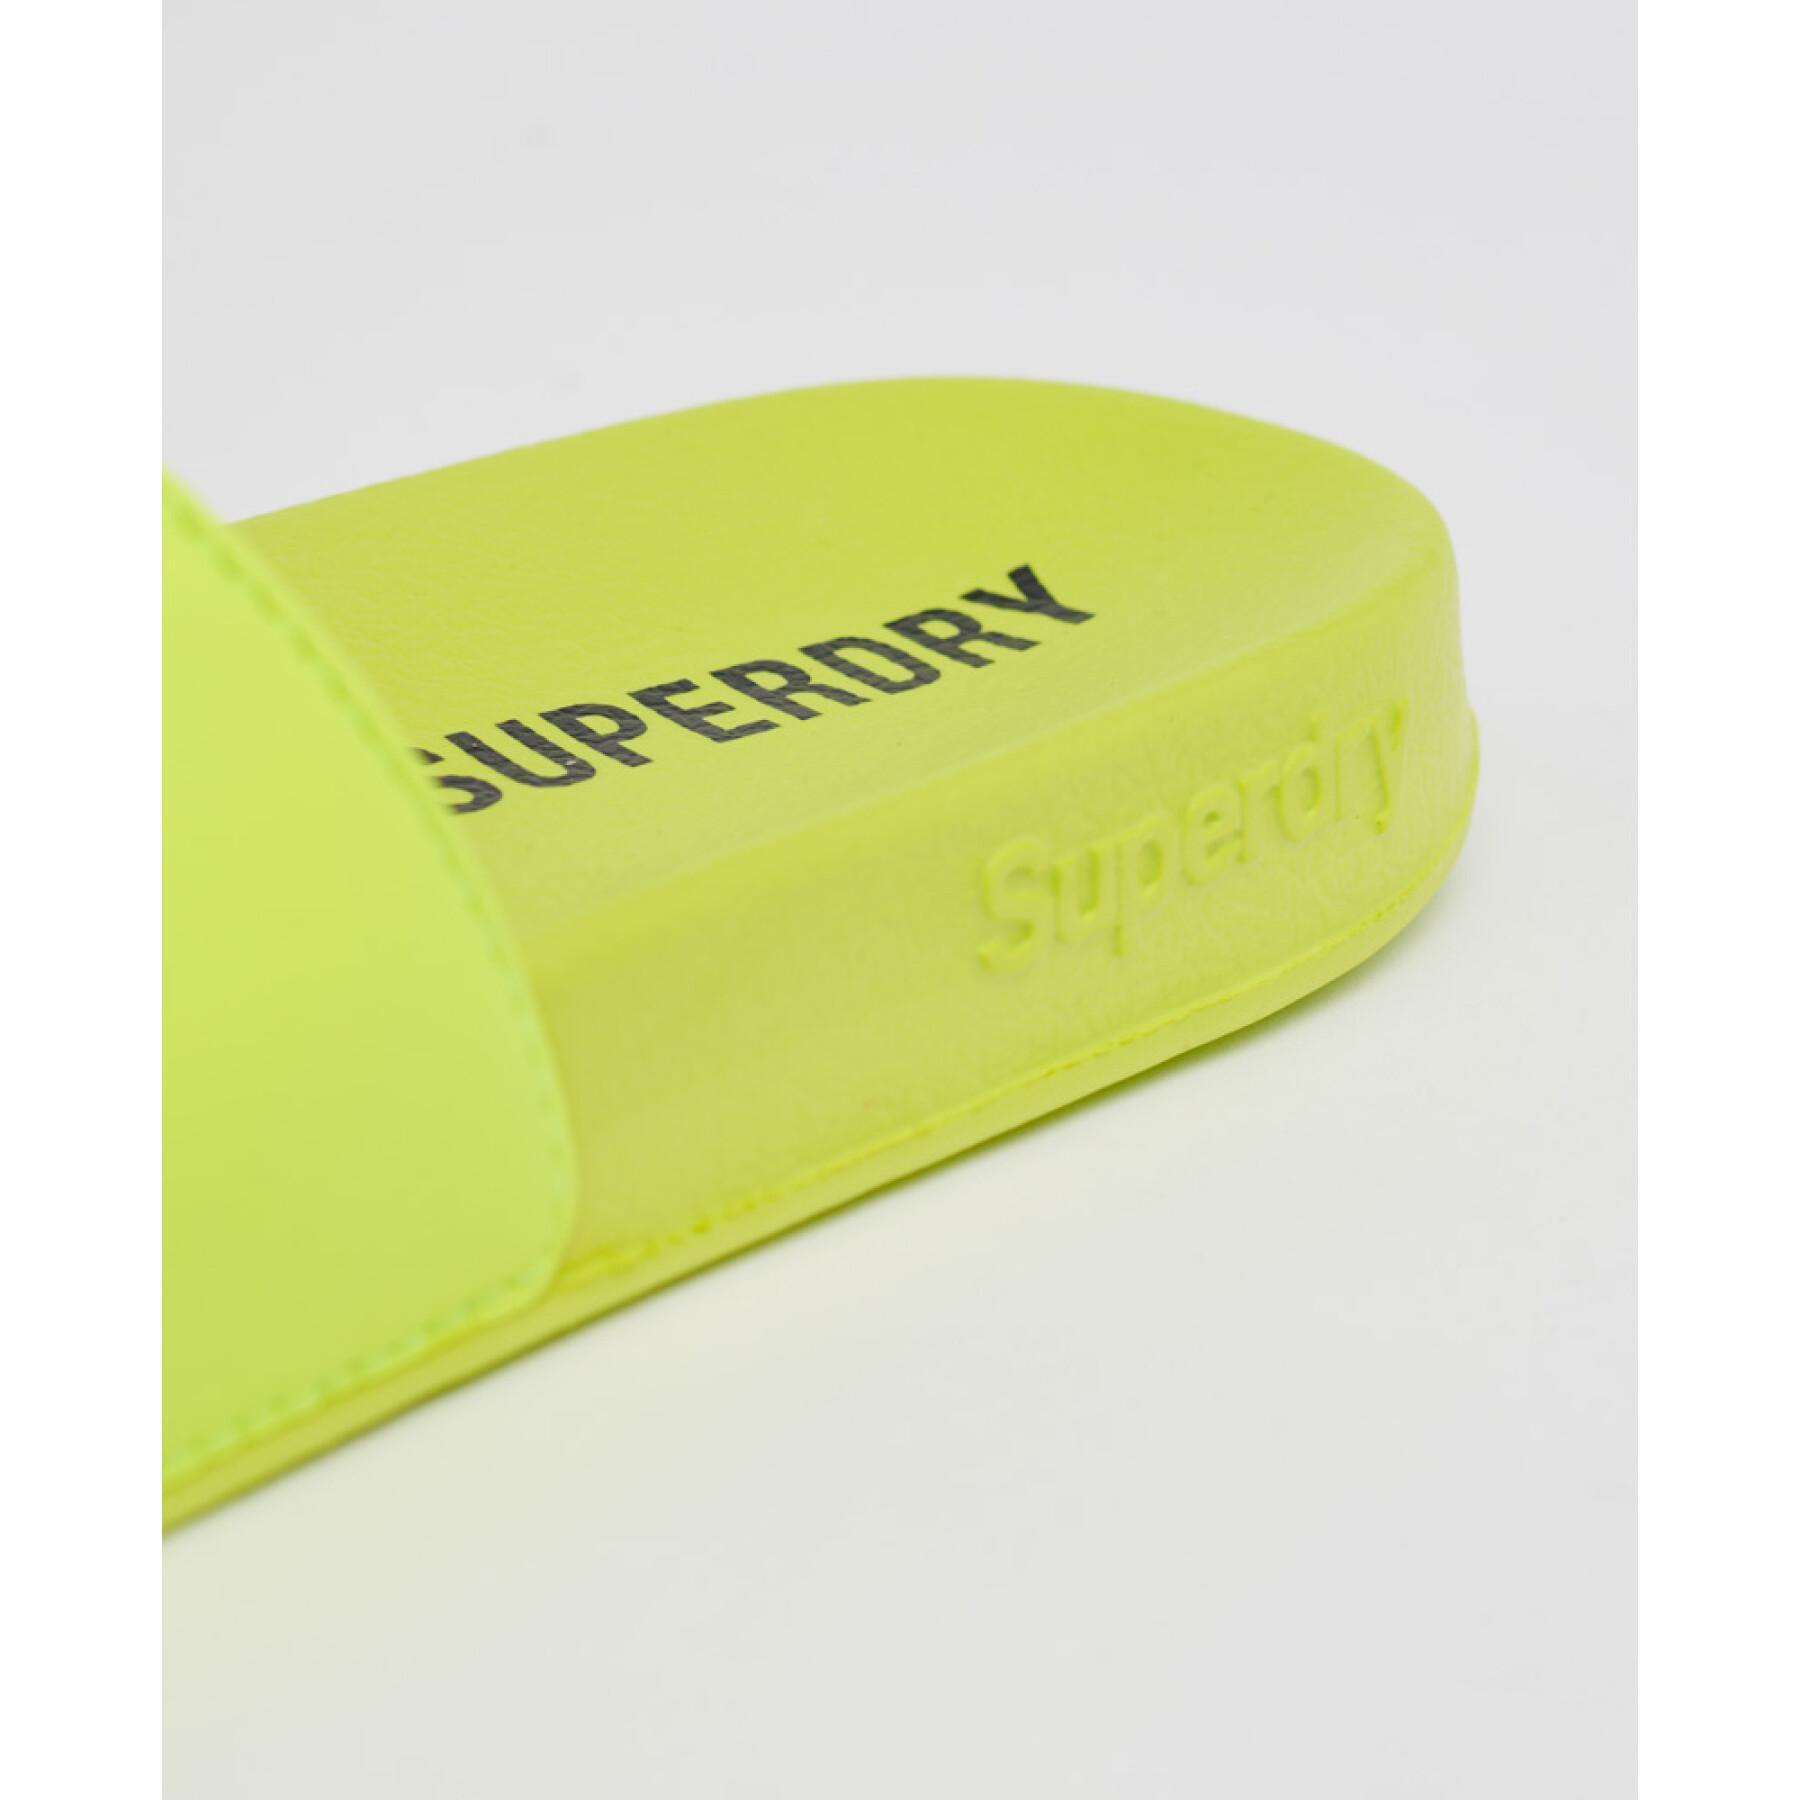 Chanclas de mujer Superdry Patch